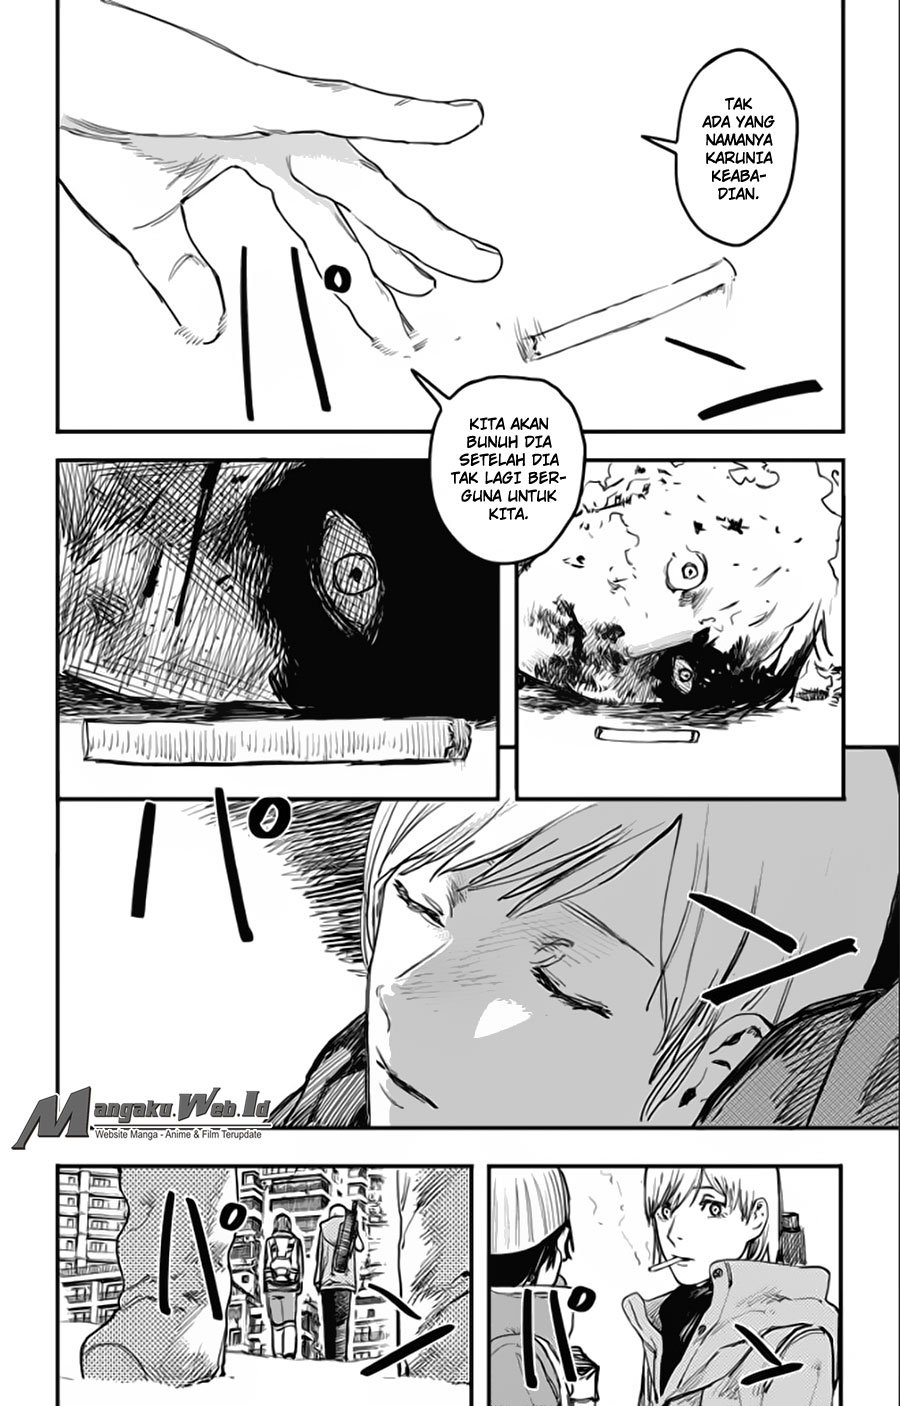 Fire Punch Chapter 06